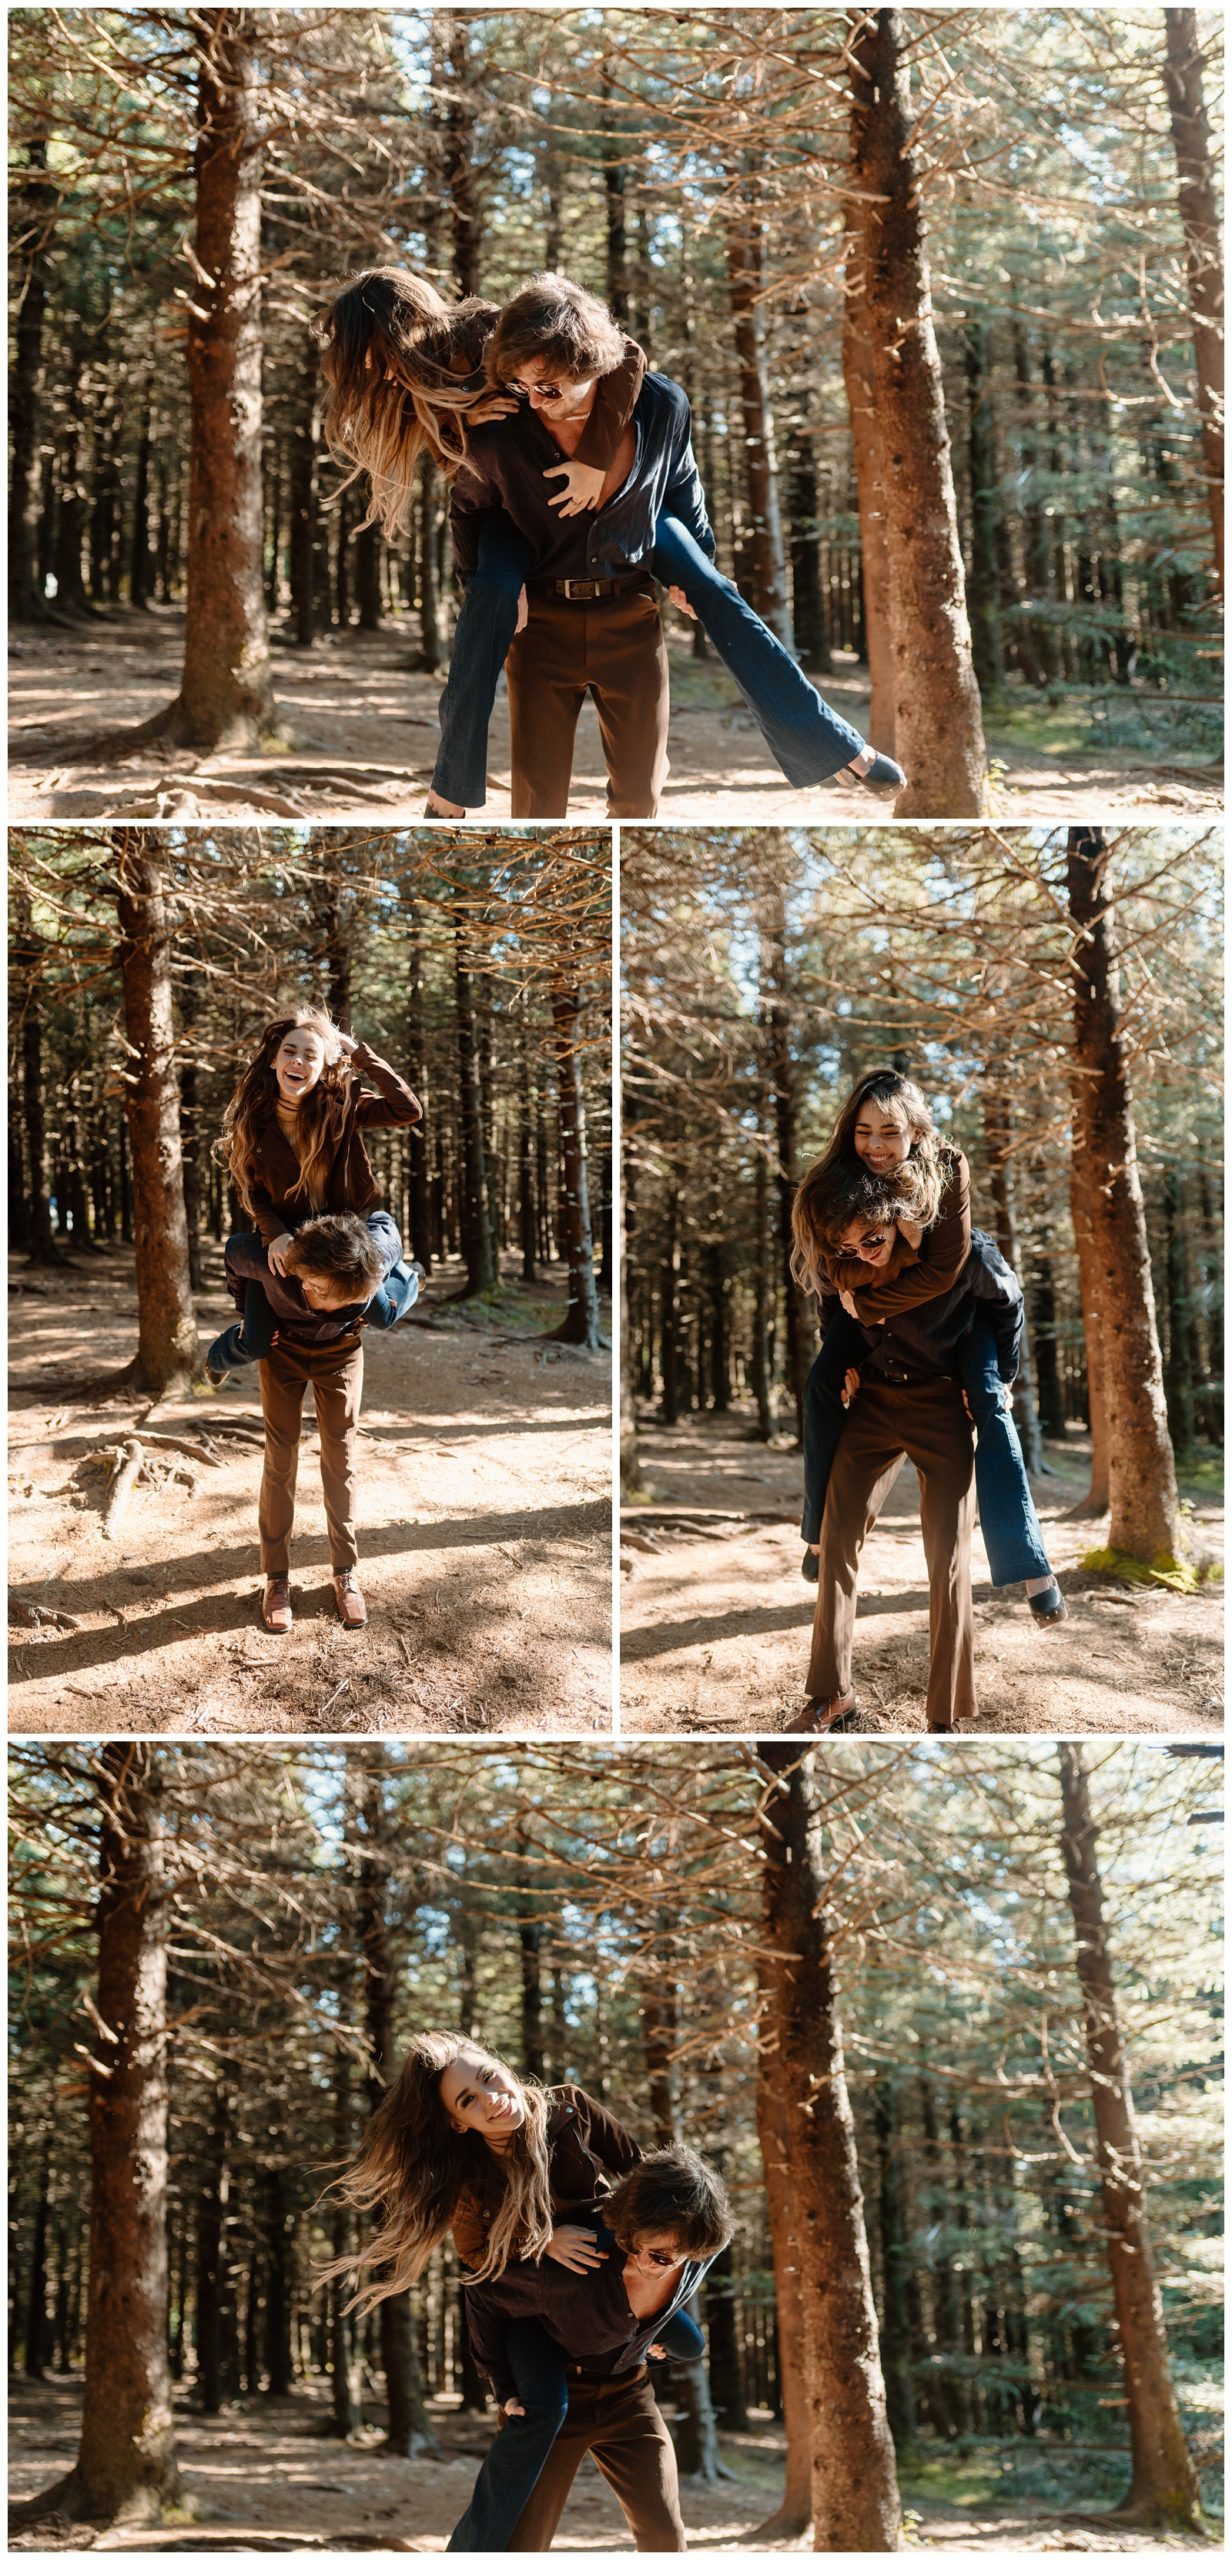 Super fun and adventurous engagement session in the mountains near Asheville by NC wedding & elopement photographer